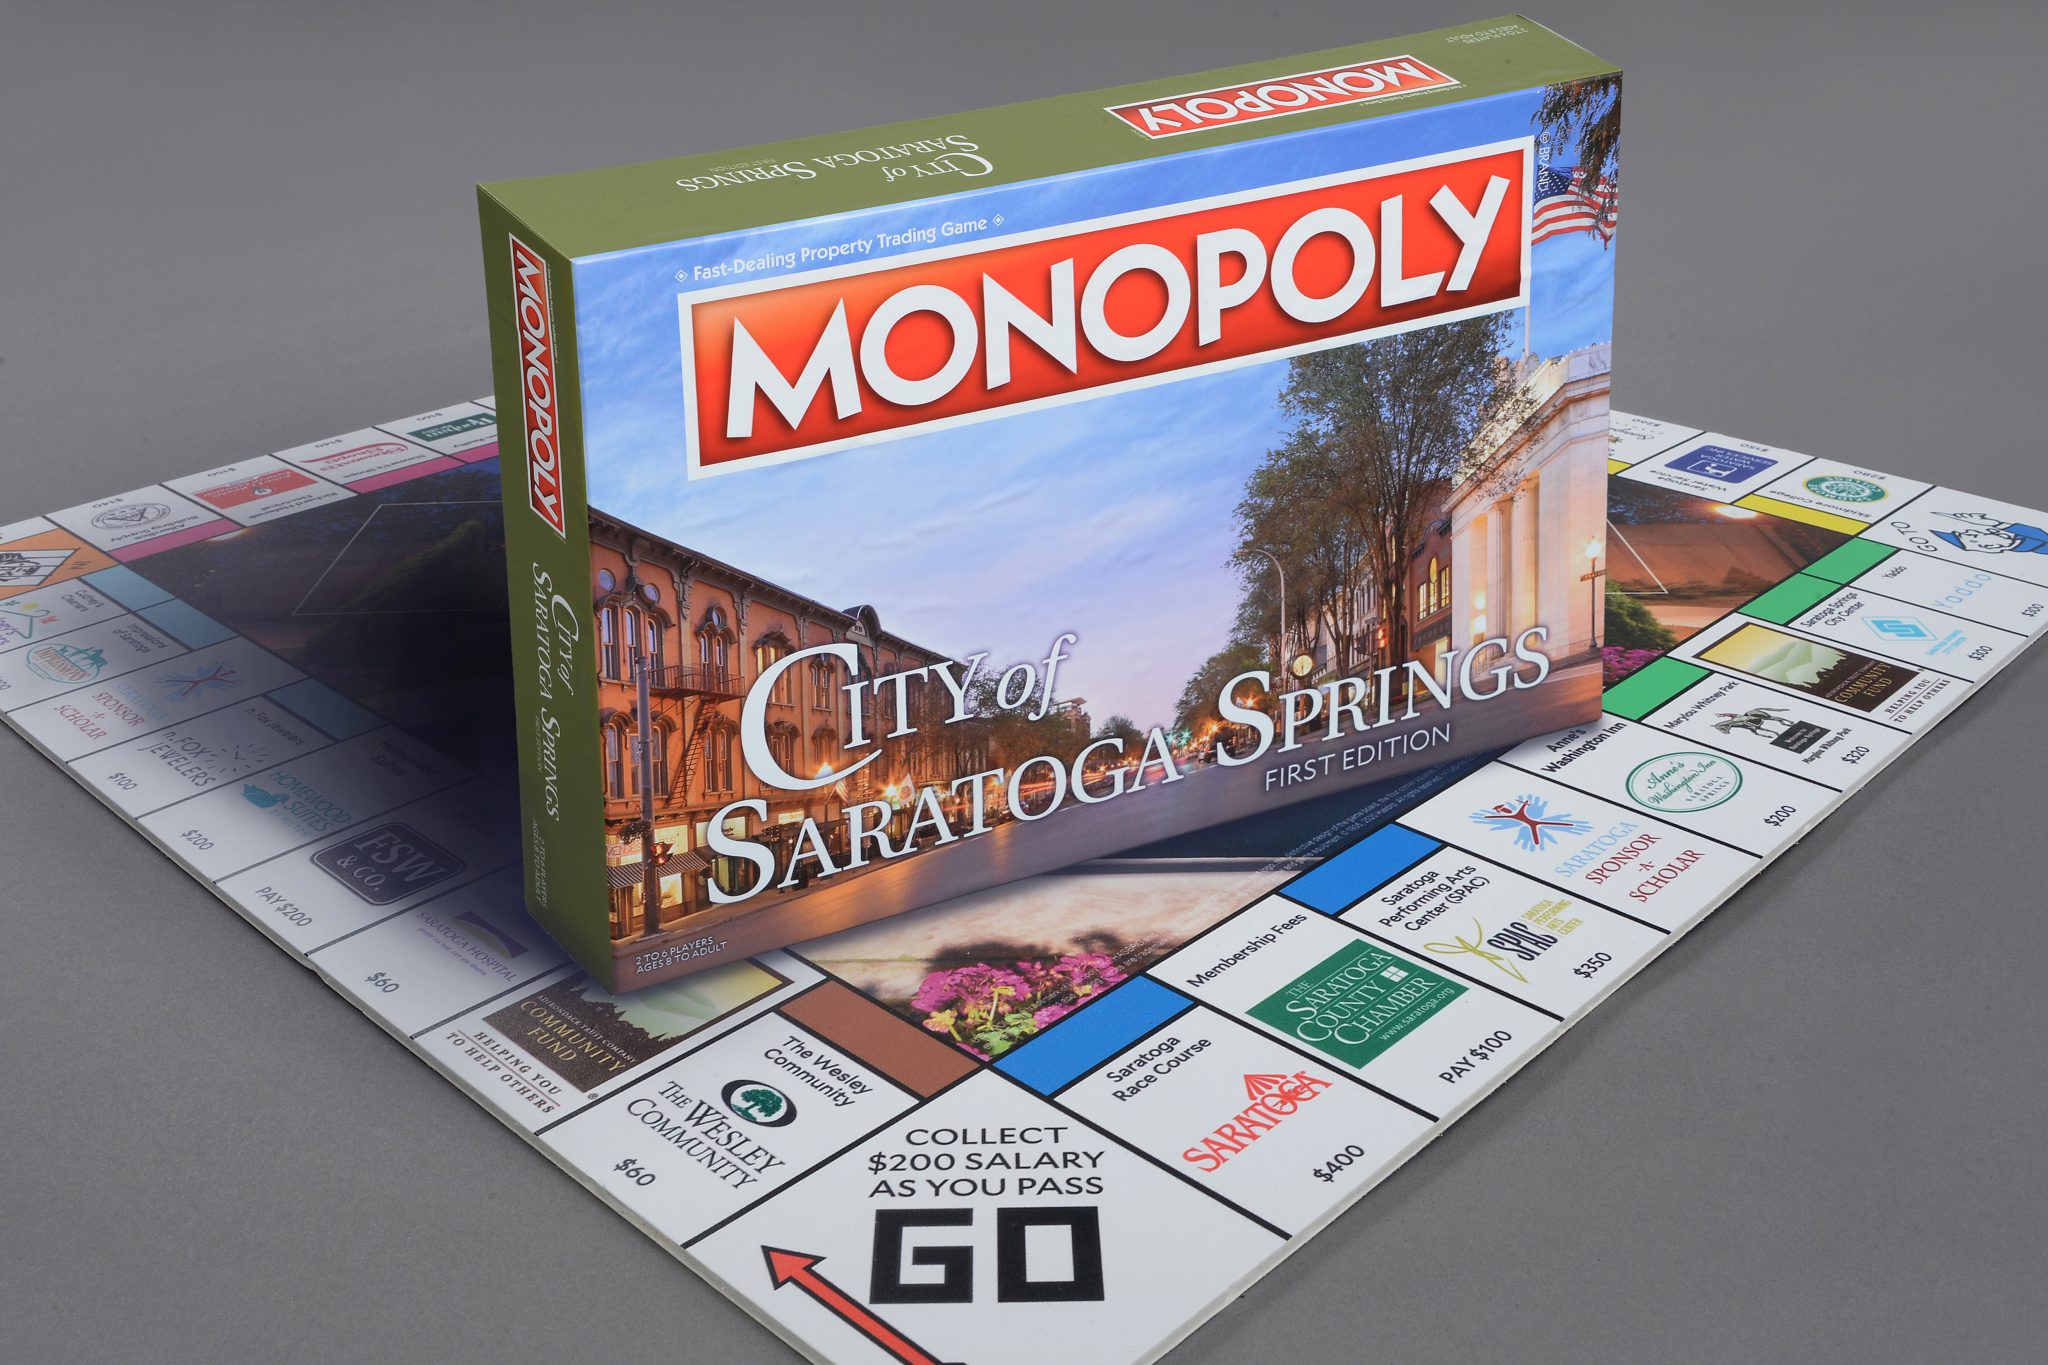 Monopoly Board Game Depicting Local Businesses Helps Raise Money For